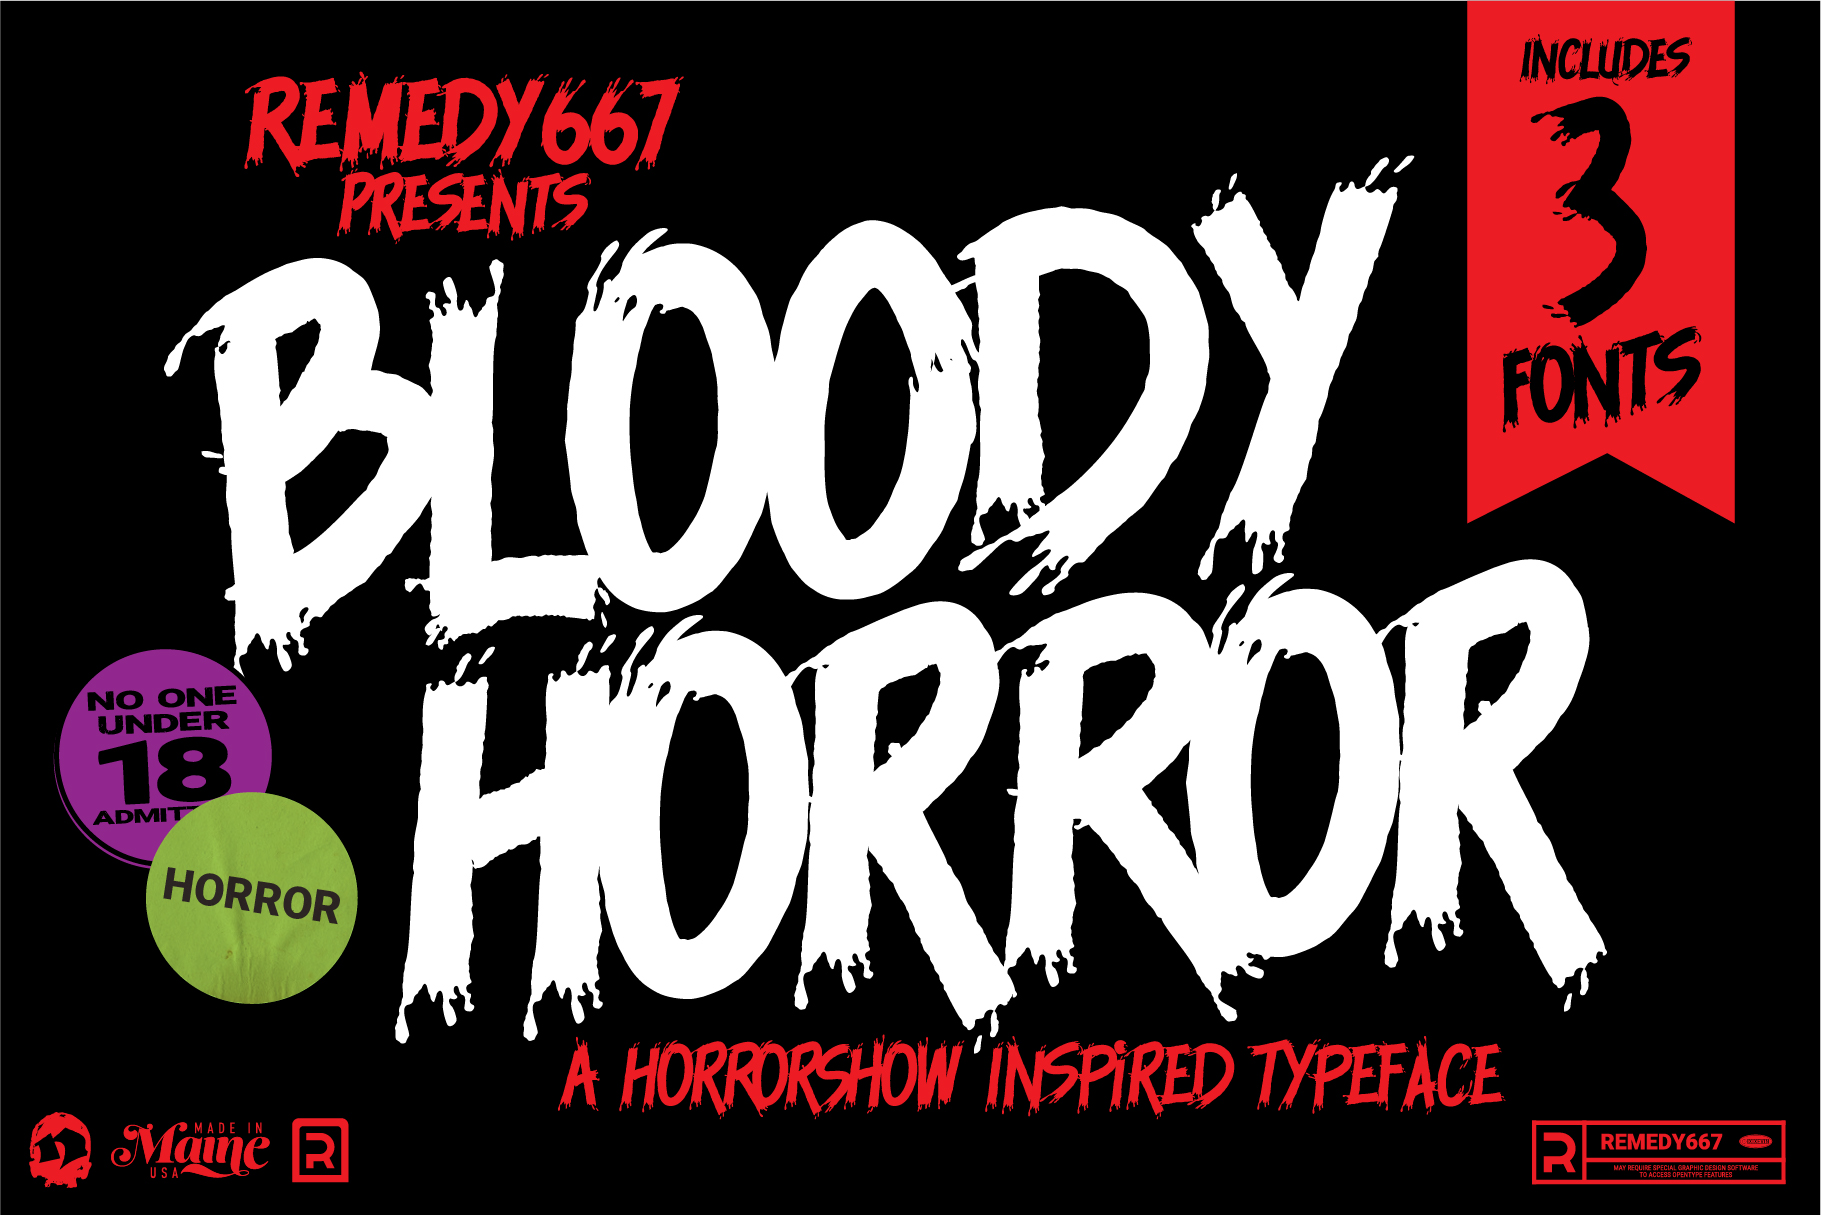 Remedy667 Bloody Horror A Horrorshow Inspired Typeface Includes 3 Fonts